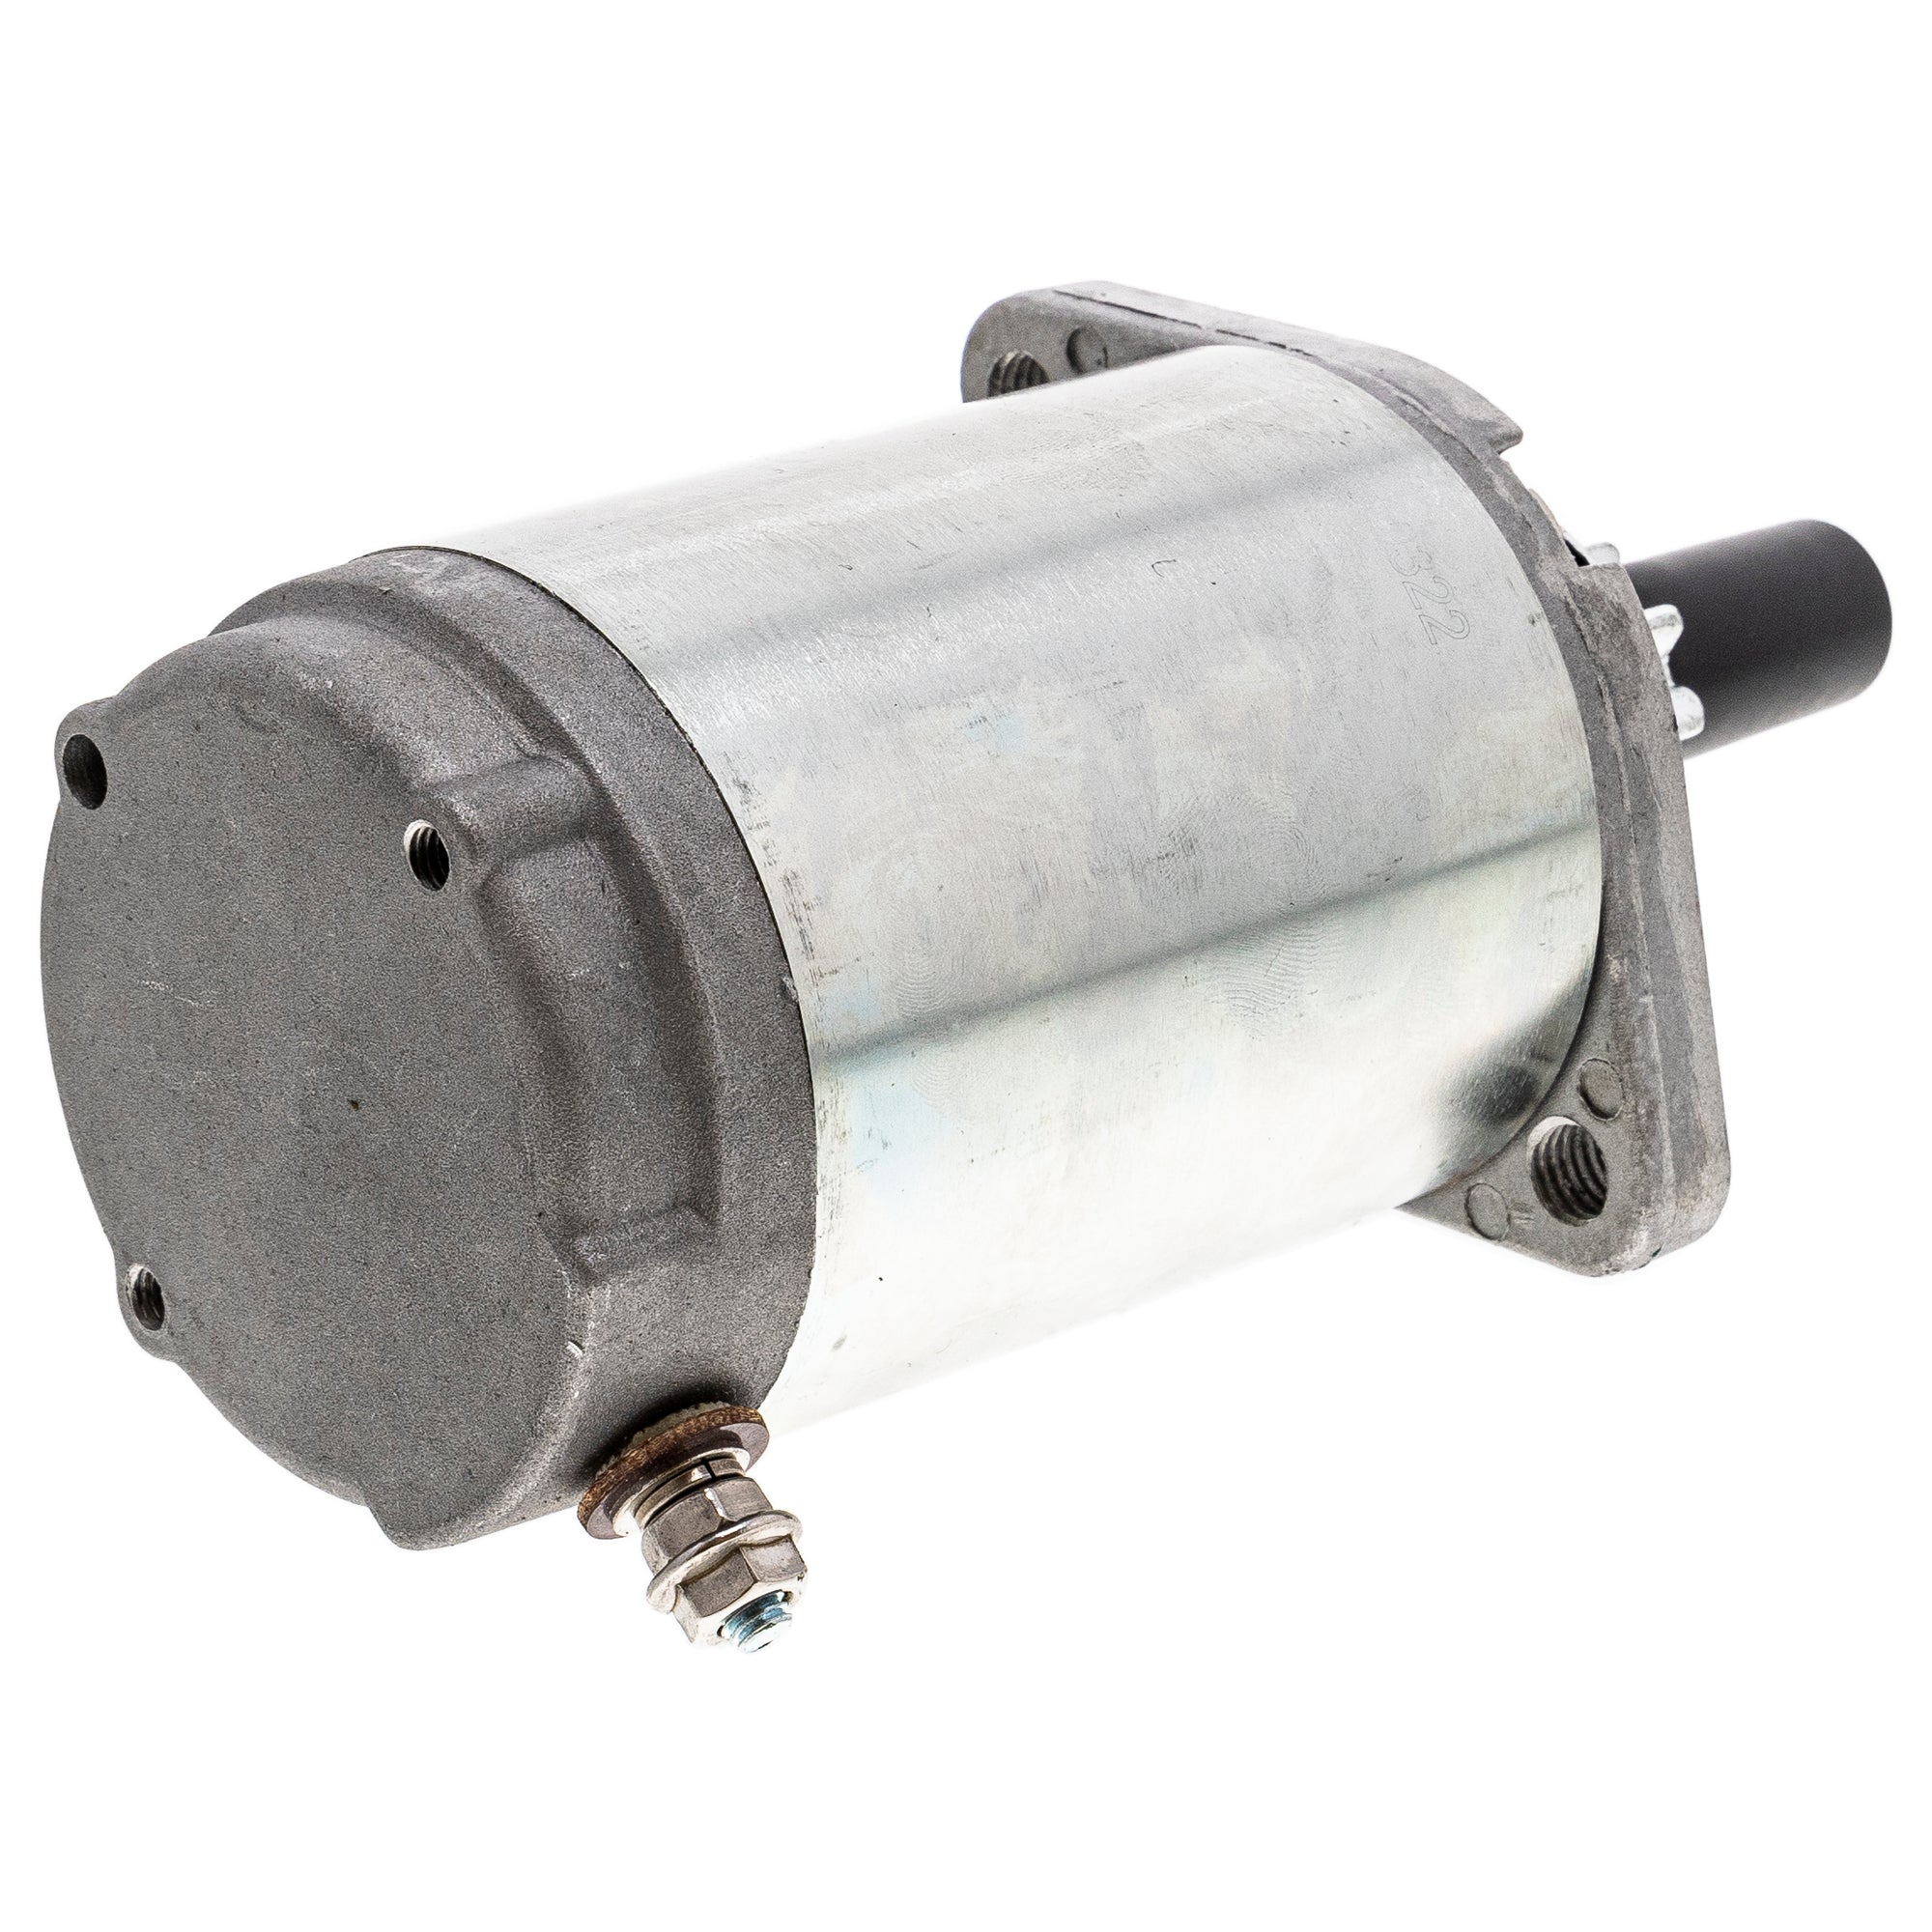 Starter Motor for Polaris Trail Classic 600 500 Indy 340 XC SP 700